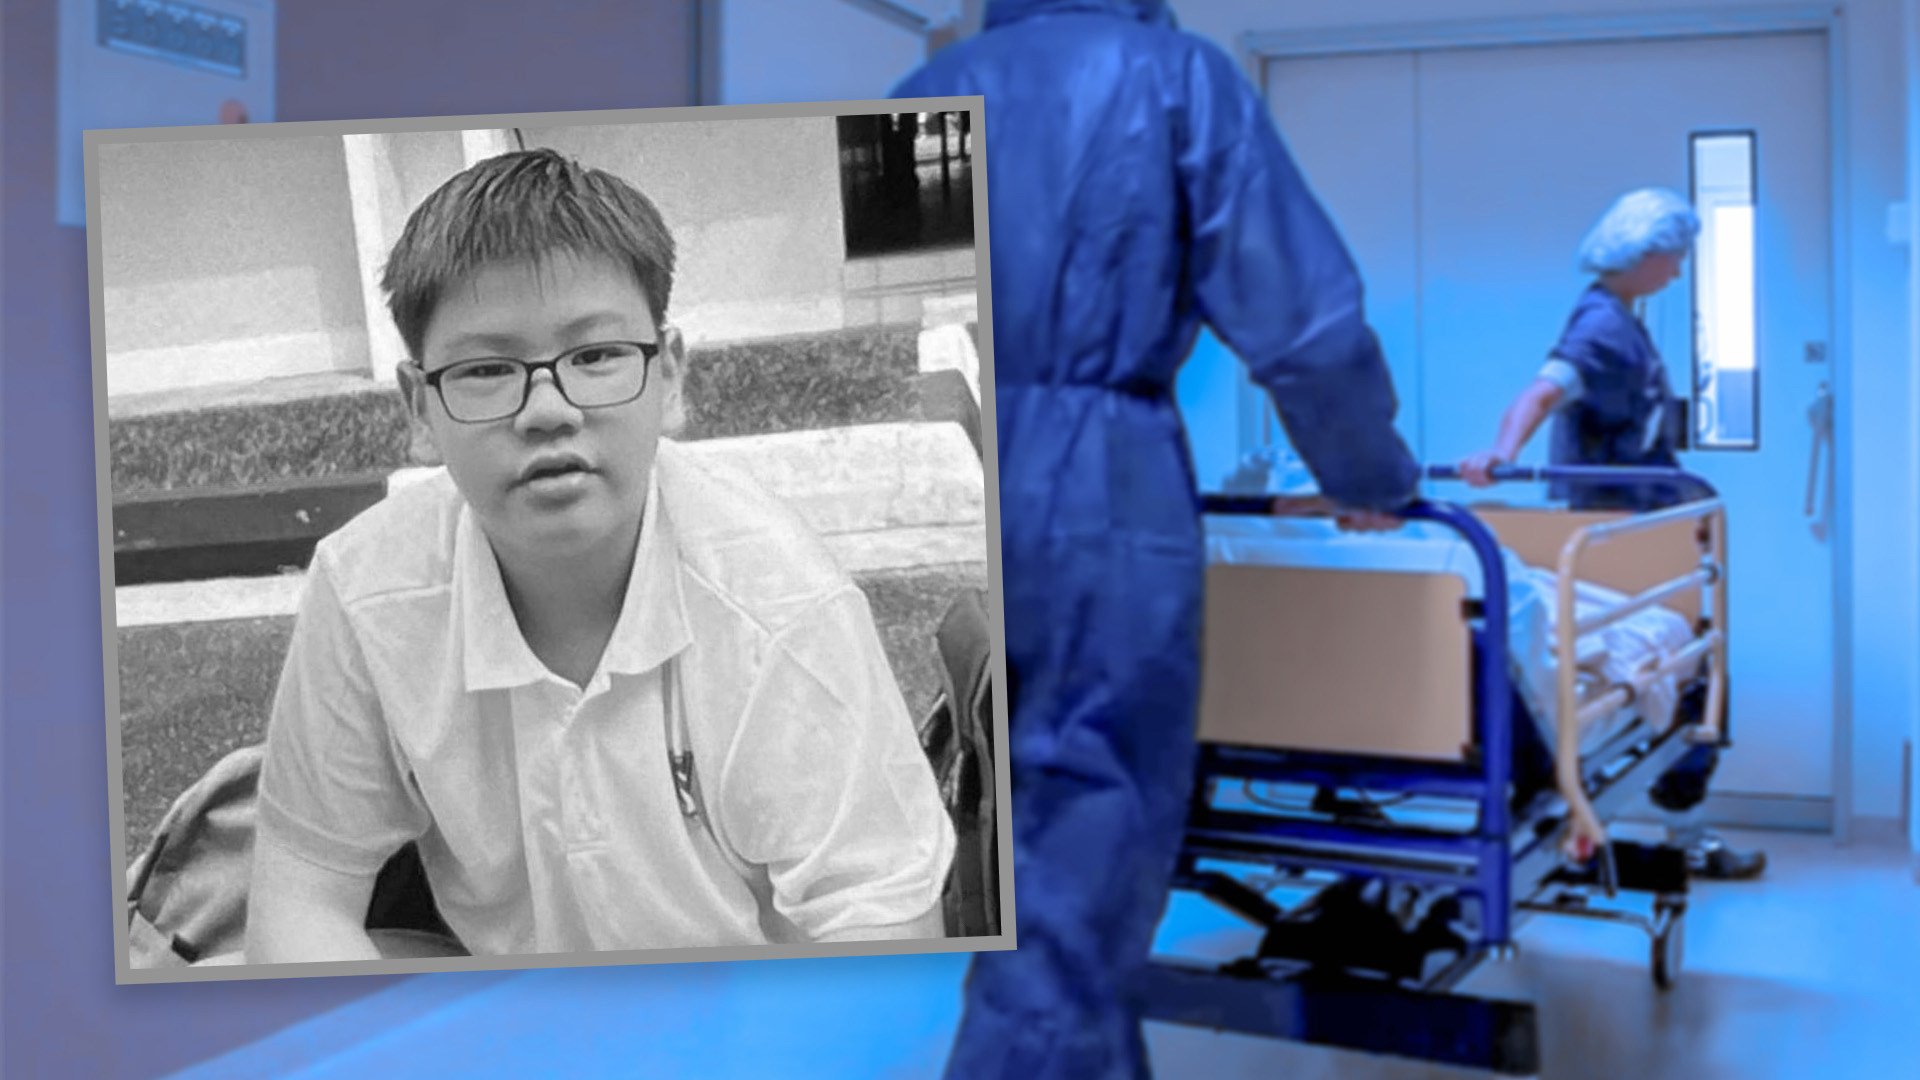 The mother of a 14-year-old Singapore boy who died after collapsing during a school sports run has donated his organs to save others, saying it is what her son would have wanted. Photo: SCMP composite/Shutterstock/Zaobao.com
